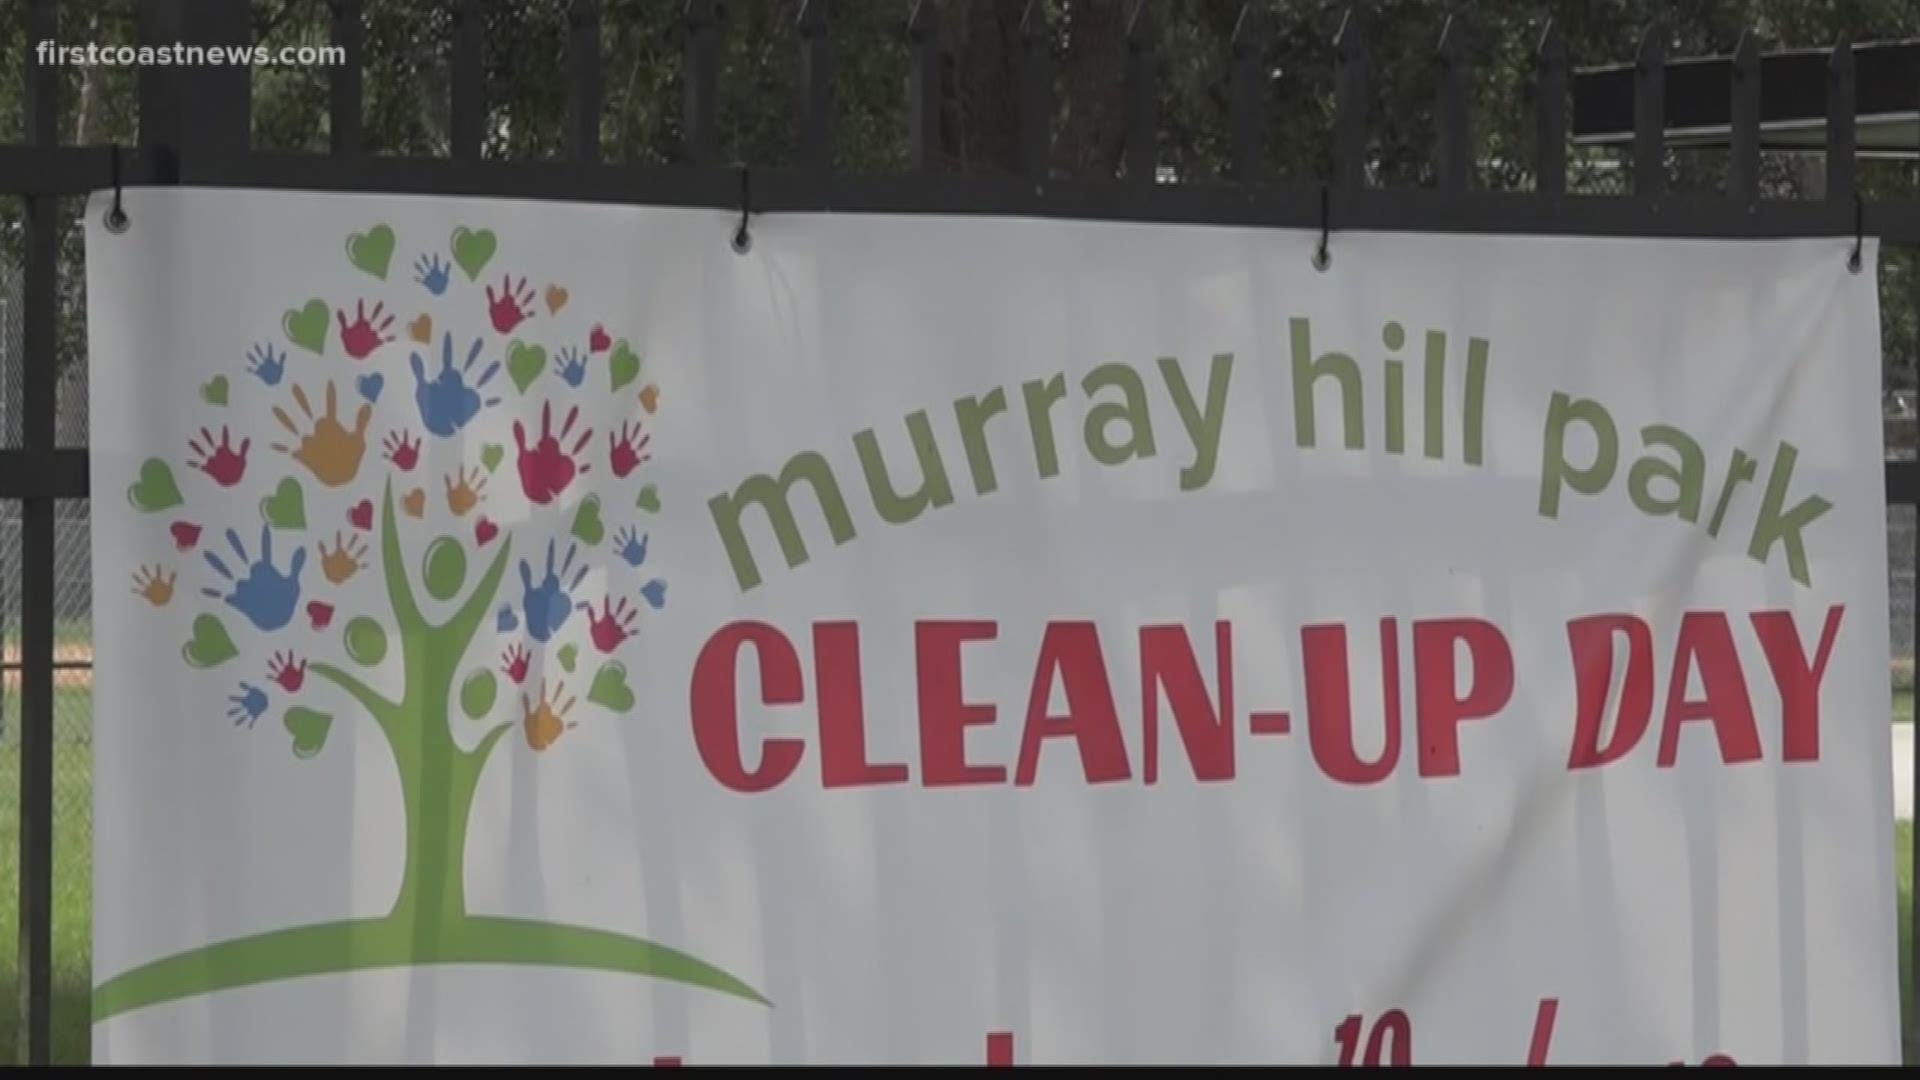 Who should be maintaining Murray Hill park, including potential safety concerns. The majority of the fixes come from volunteers.